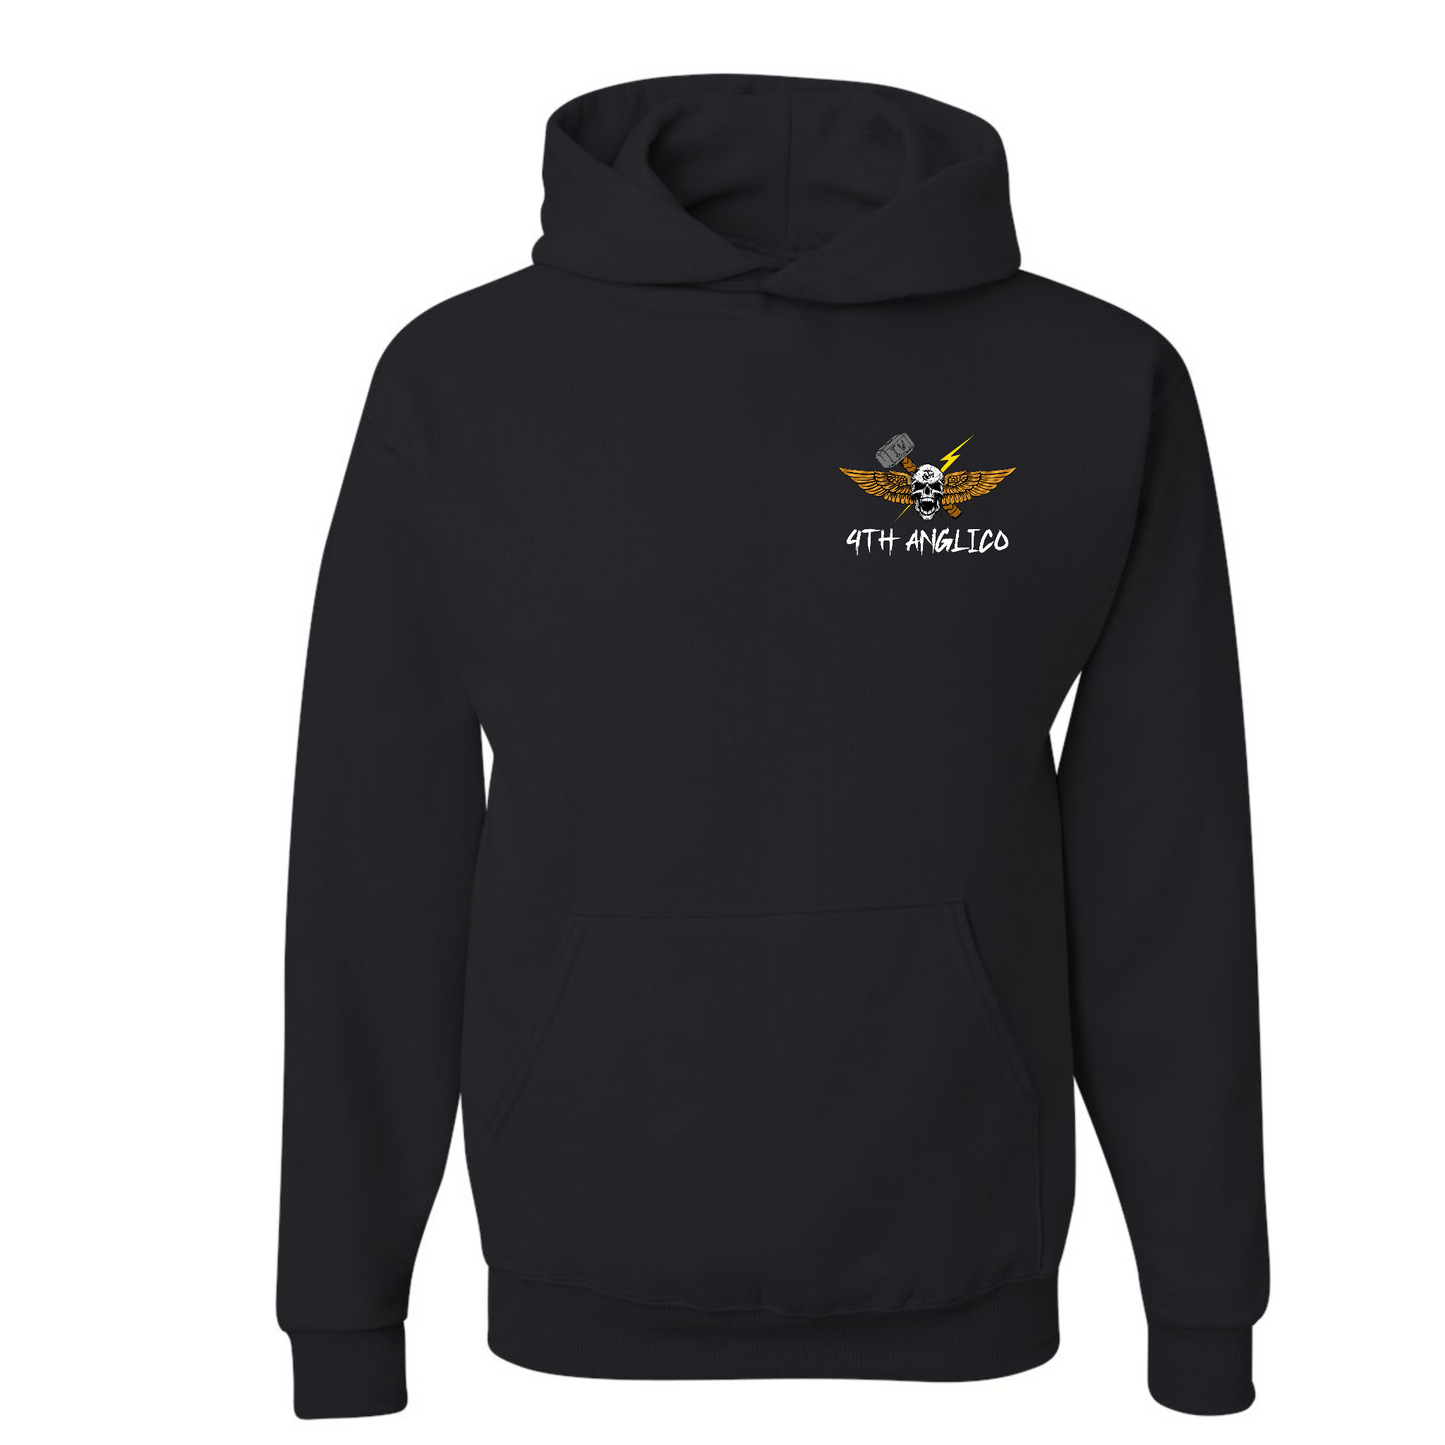 4TH ANGLICO new HOODIE